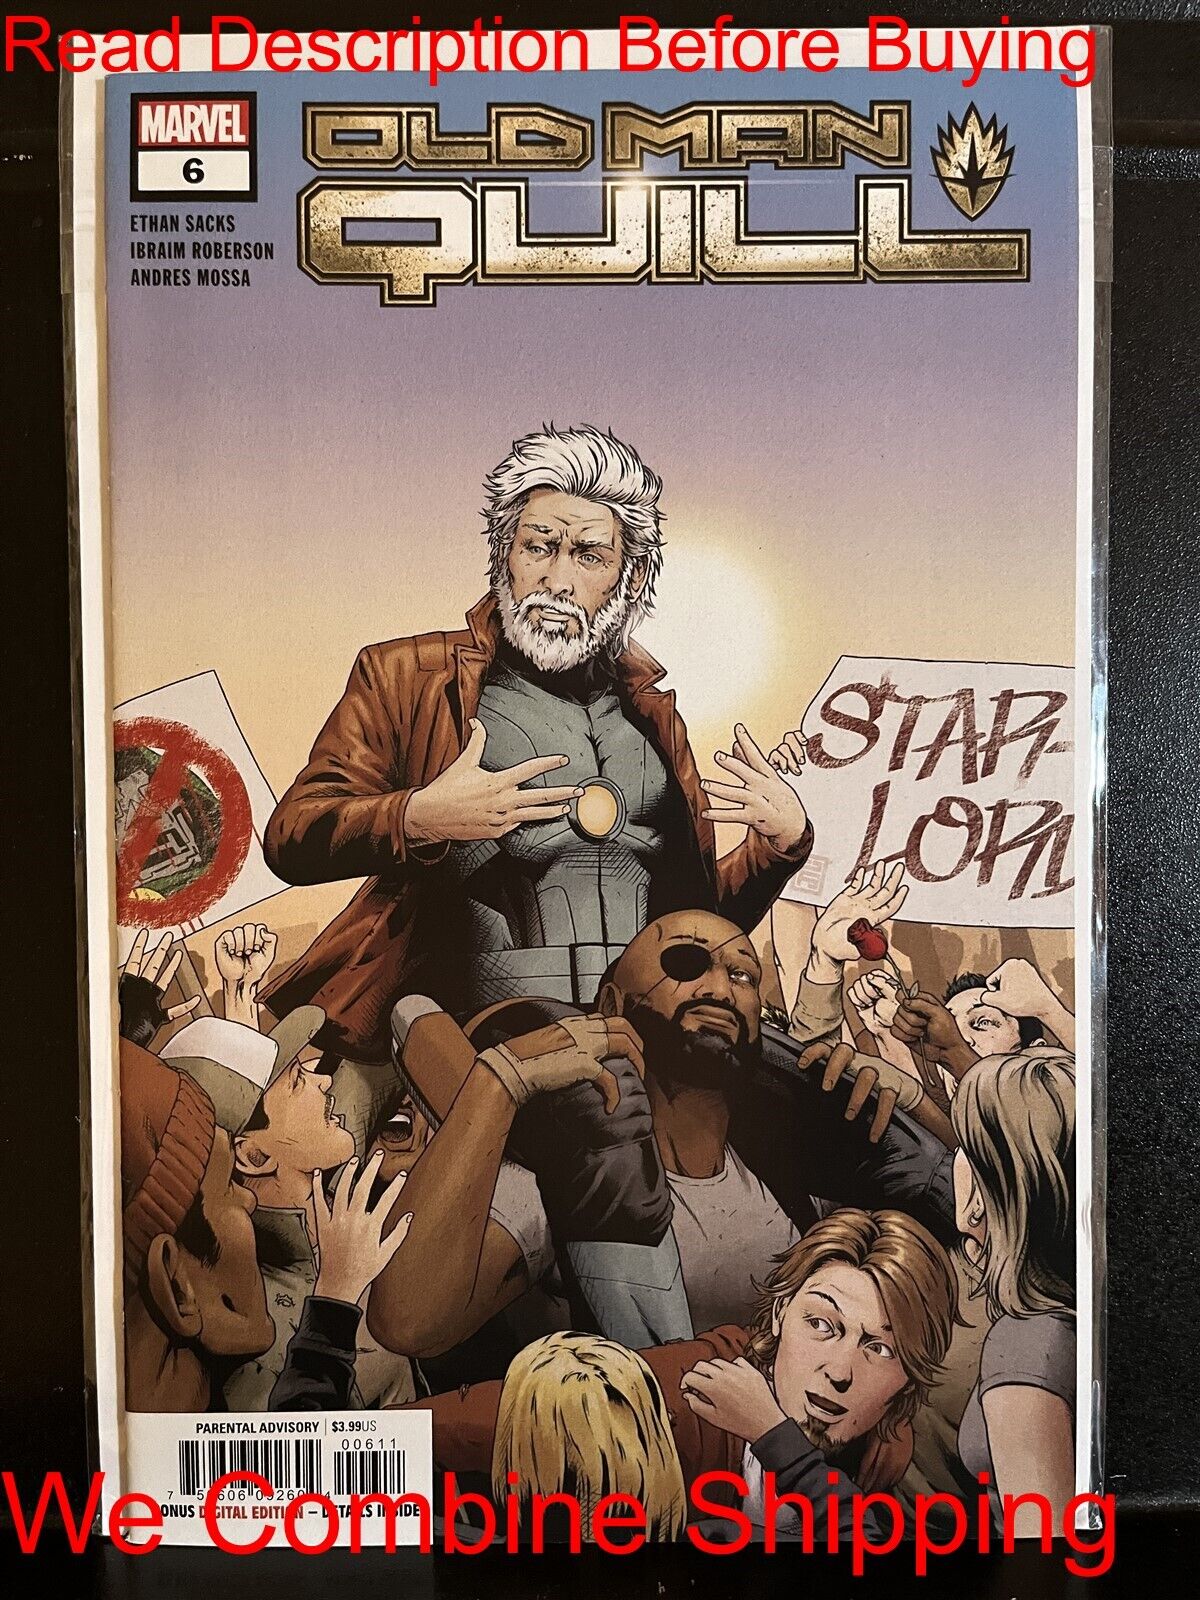 BARGAIN BOOKS ($5 MIN PURCHASE) Old Man Quill #6 (2019) Free Combine Shipping